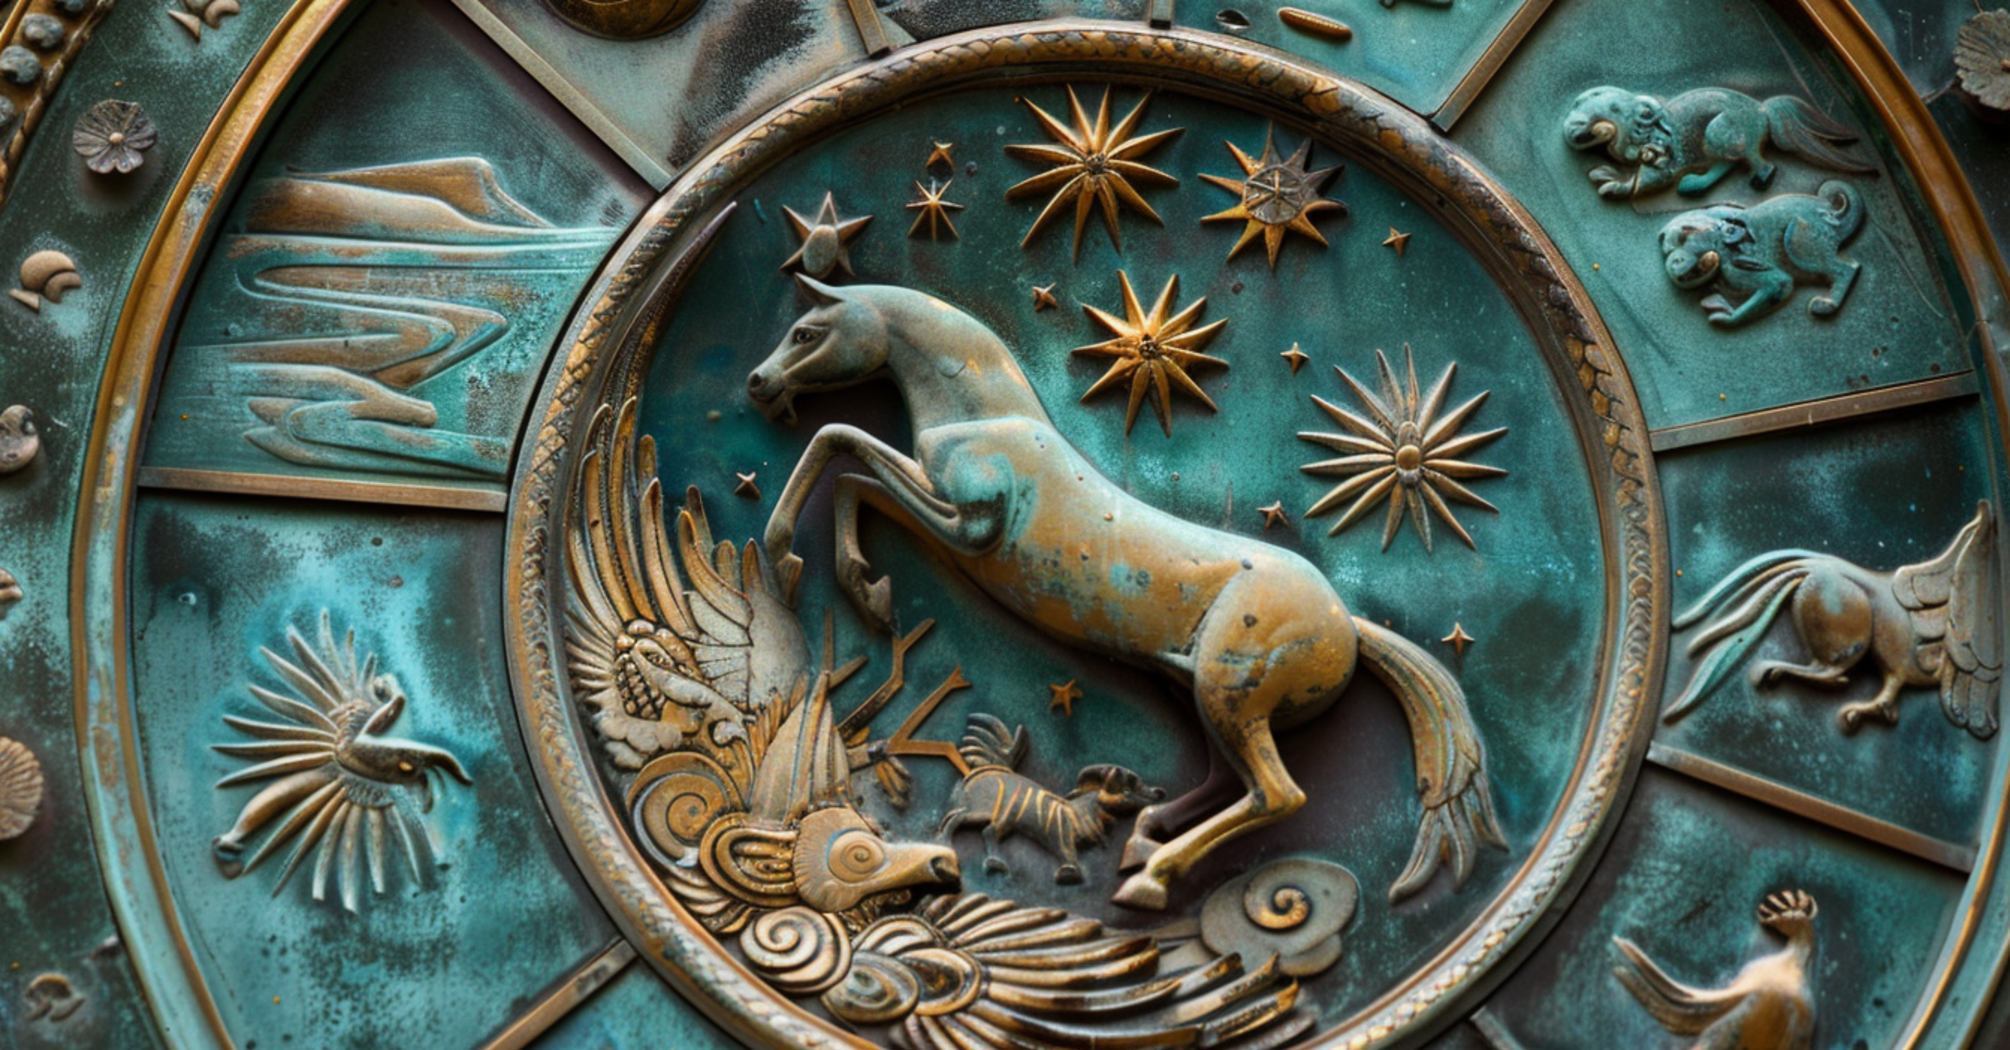 Trust your intuition and enjoy new prospects: Chinese horoscope for June 13